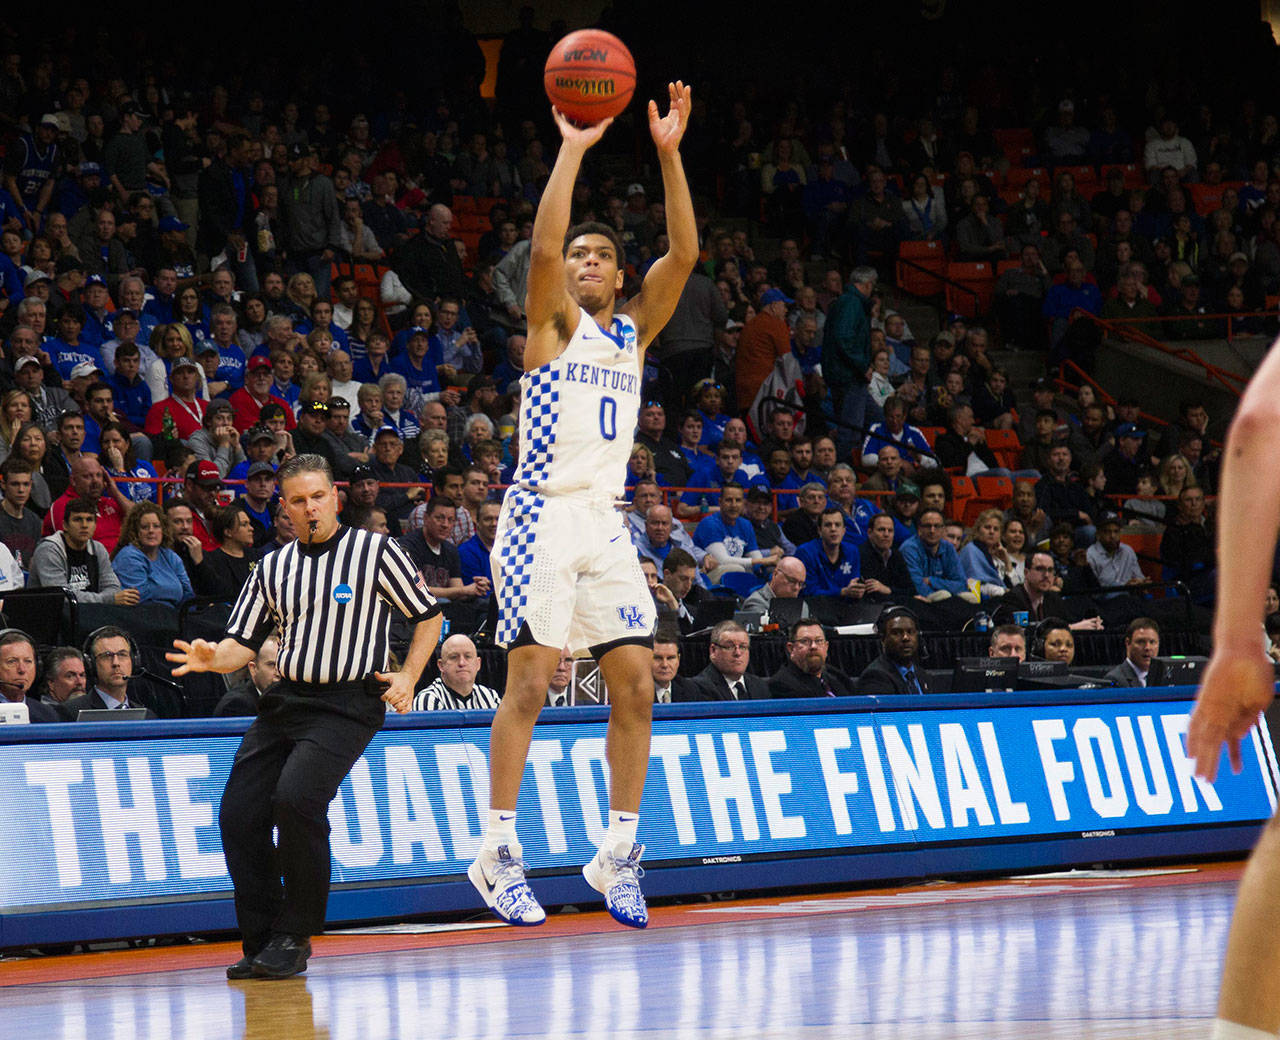 Former Kentucky point guard Quade Green pulls up for a 3-pointer against Davidson during the first round of the NCAA Tournament West Regional on March 15, 2018. Green transferred to Washington and had his eligibility petition approved by the NCAA on Friday. (Darin Oswald/Idaho Statesman/TNS)